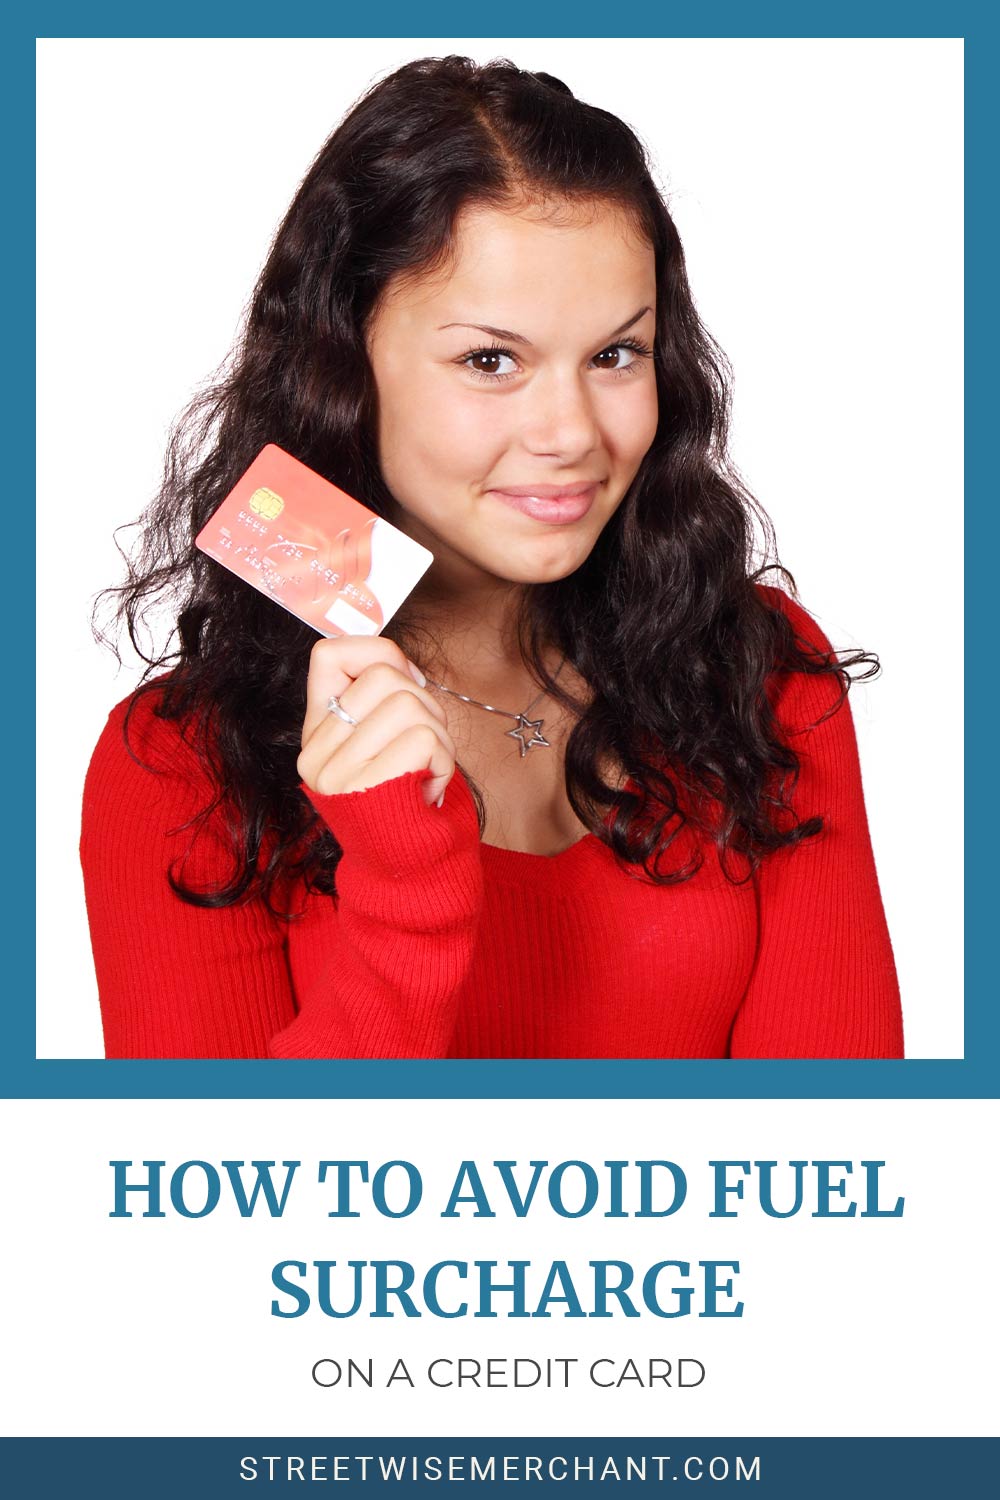 How to Avoid Fuel Surcharge On a Credit Card